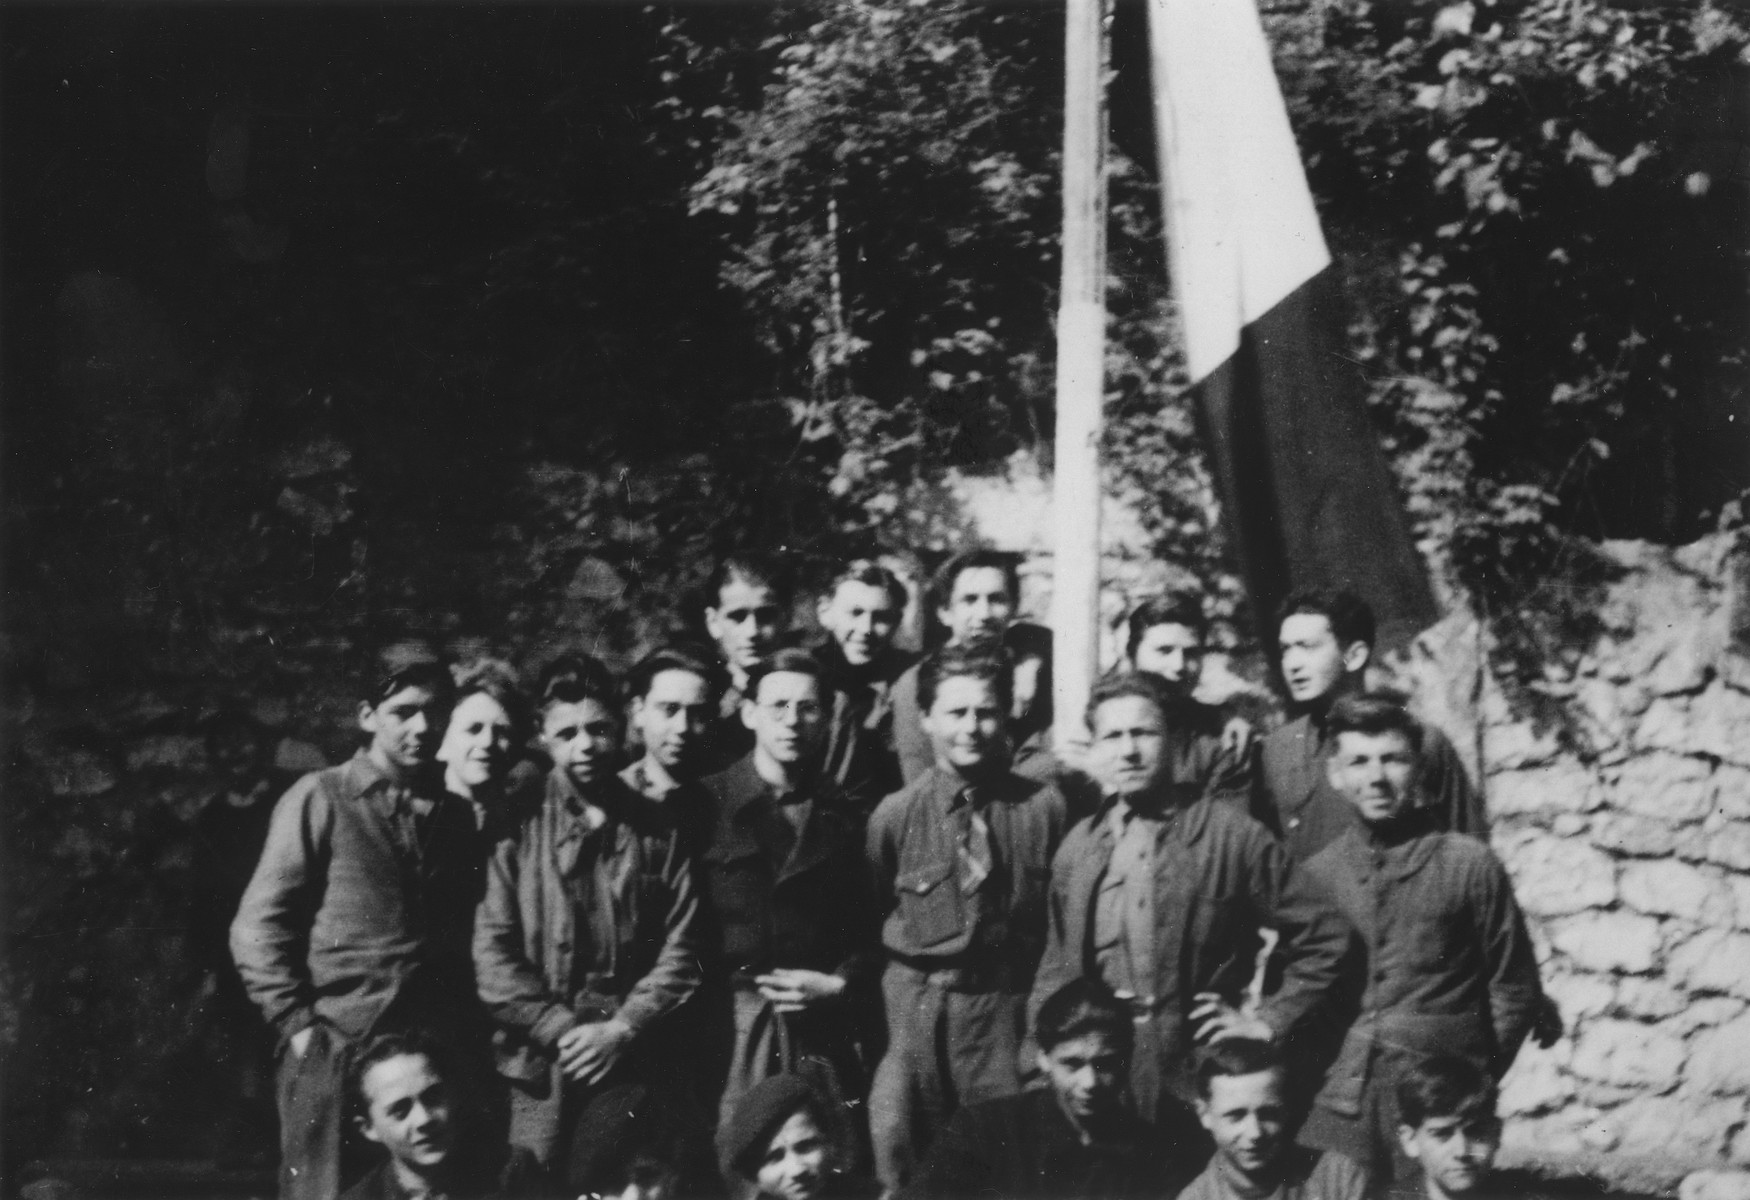 The members of the Vichy fascist youth movement, Moissons Nouvelles, gather around a flag pole in Pont de Beauvoisin.  A few of the boys are hidden Jews who were placed at the center by the OSE (Oeuvre de Secours aux Enfants).